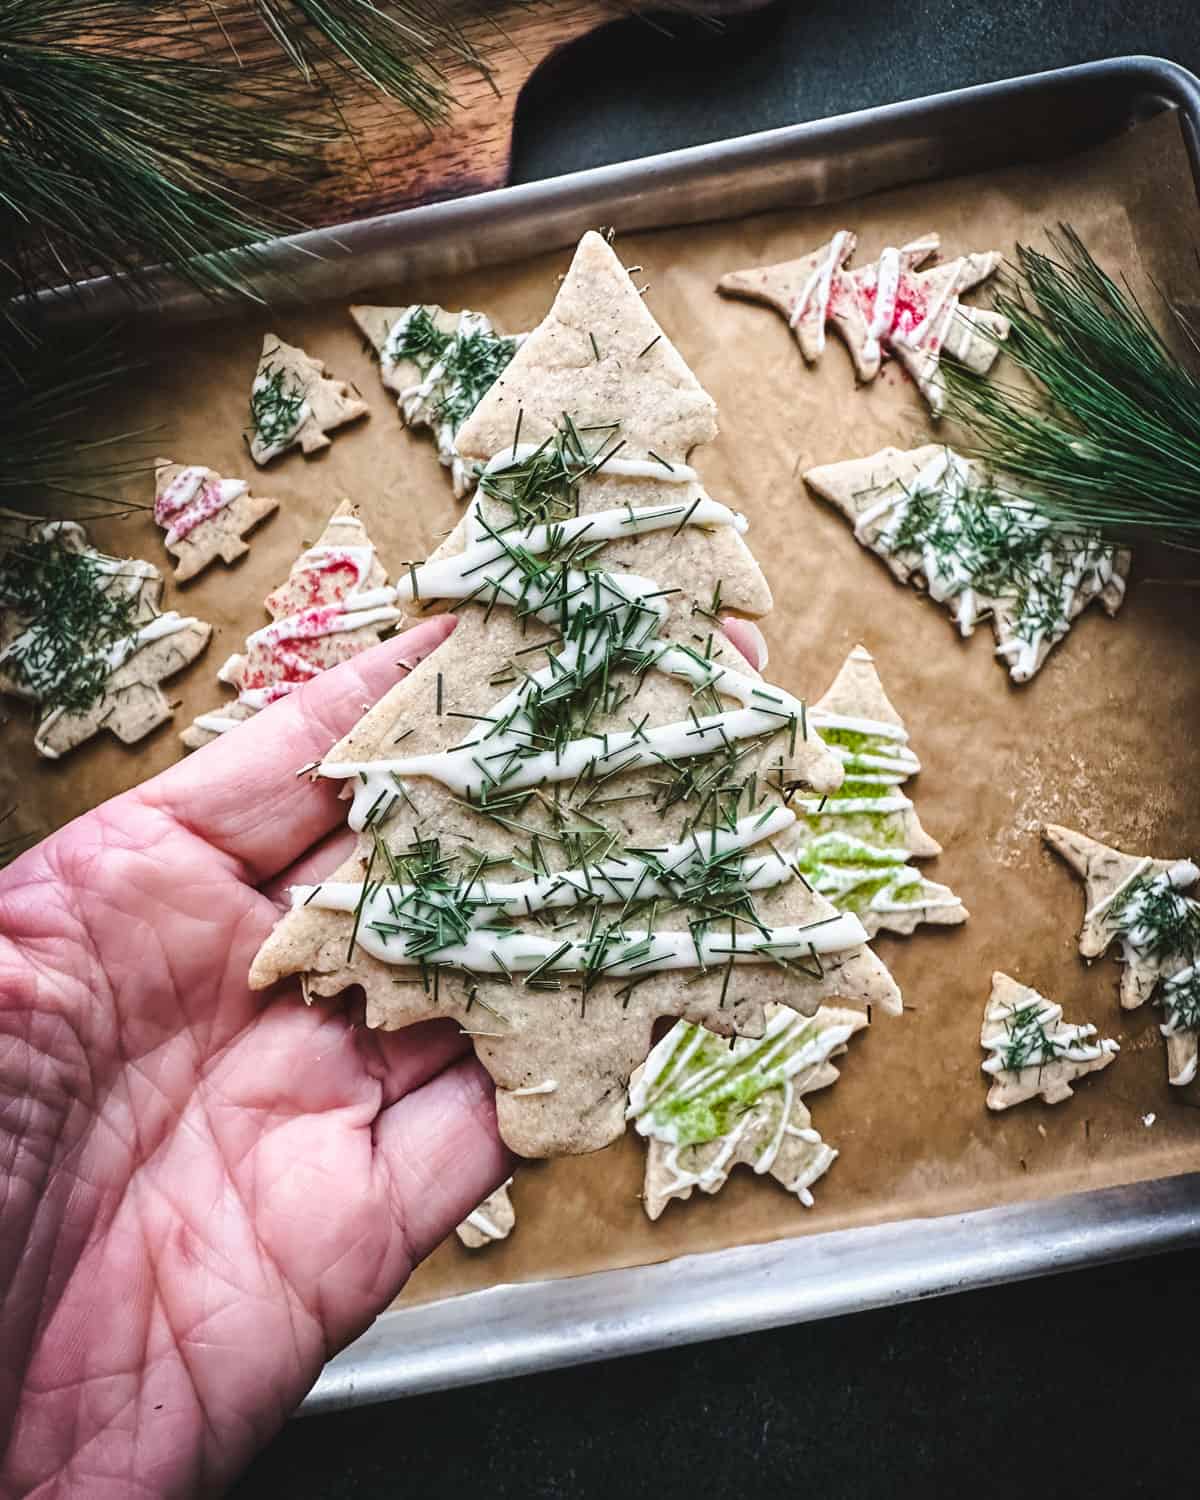 A tree shaped pine needle cookie with icing drizzle and pine needles sprinkled on top, held up by a hand. A cookie sheet with other tree cookies is in the background. 